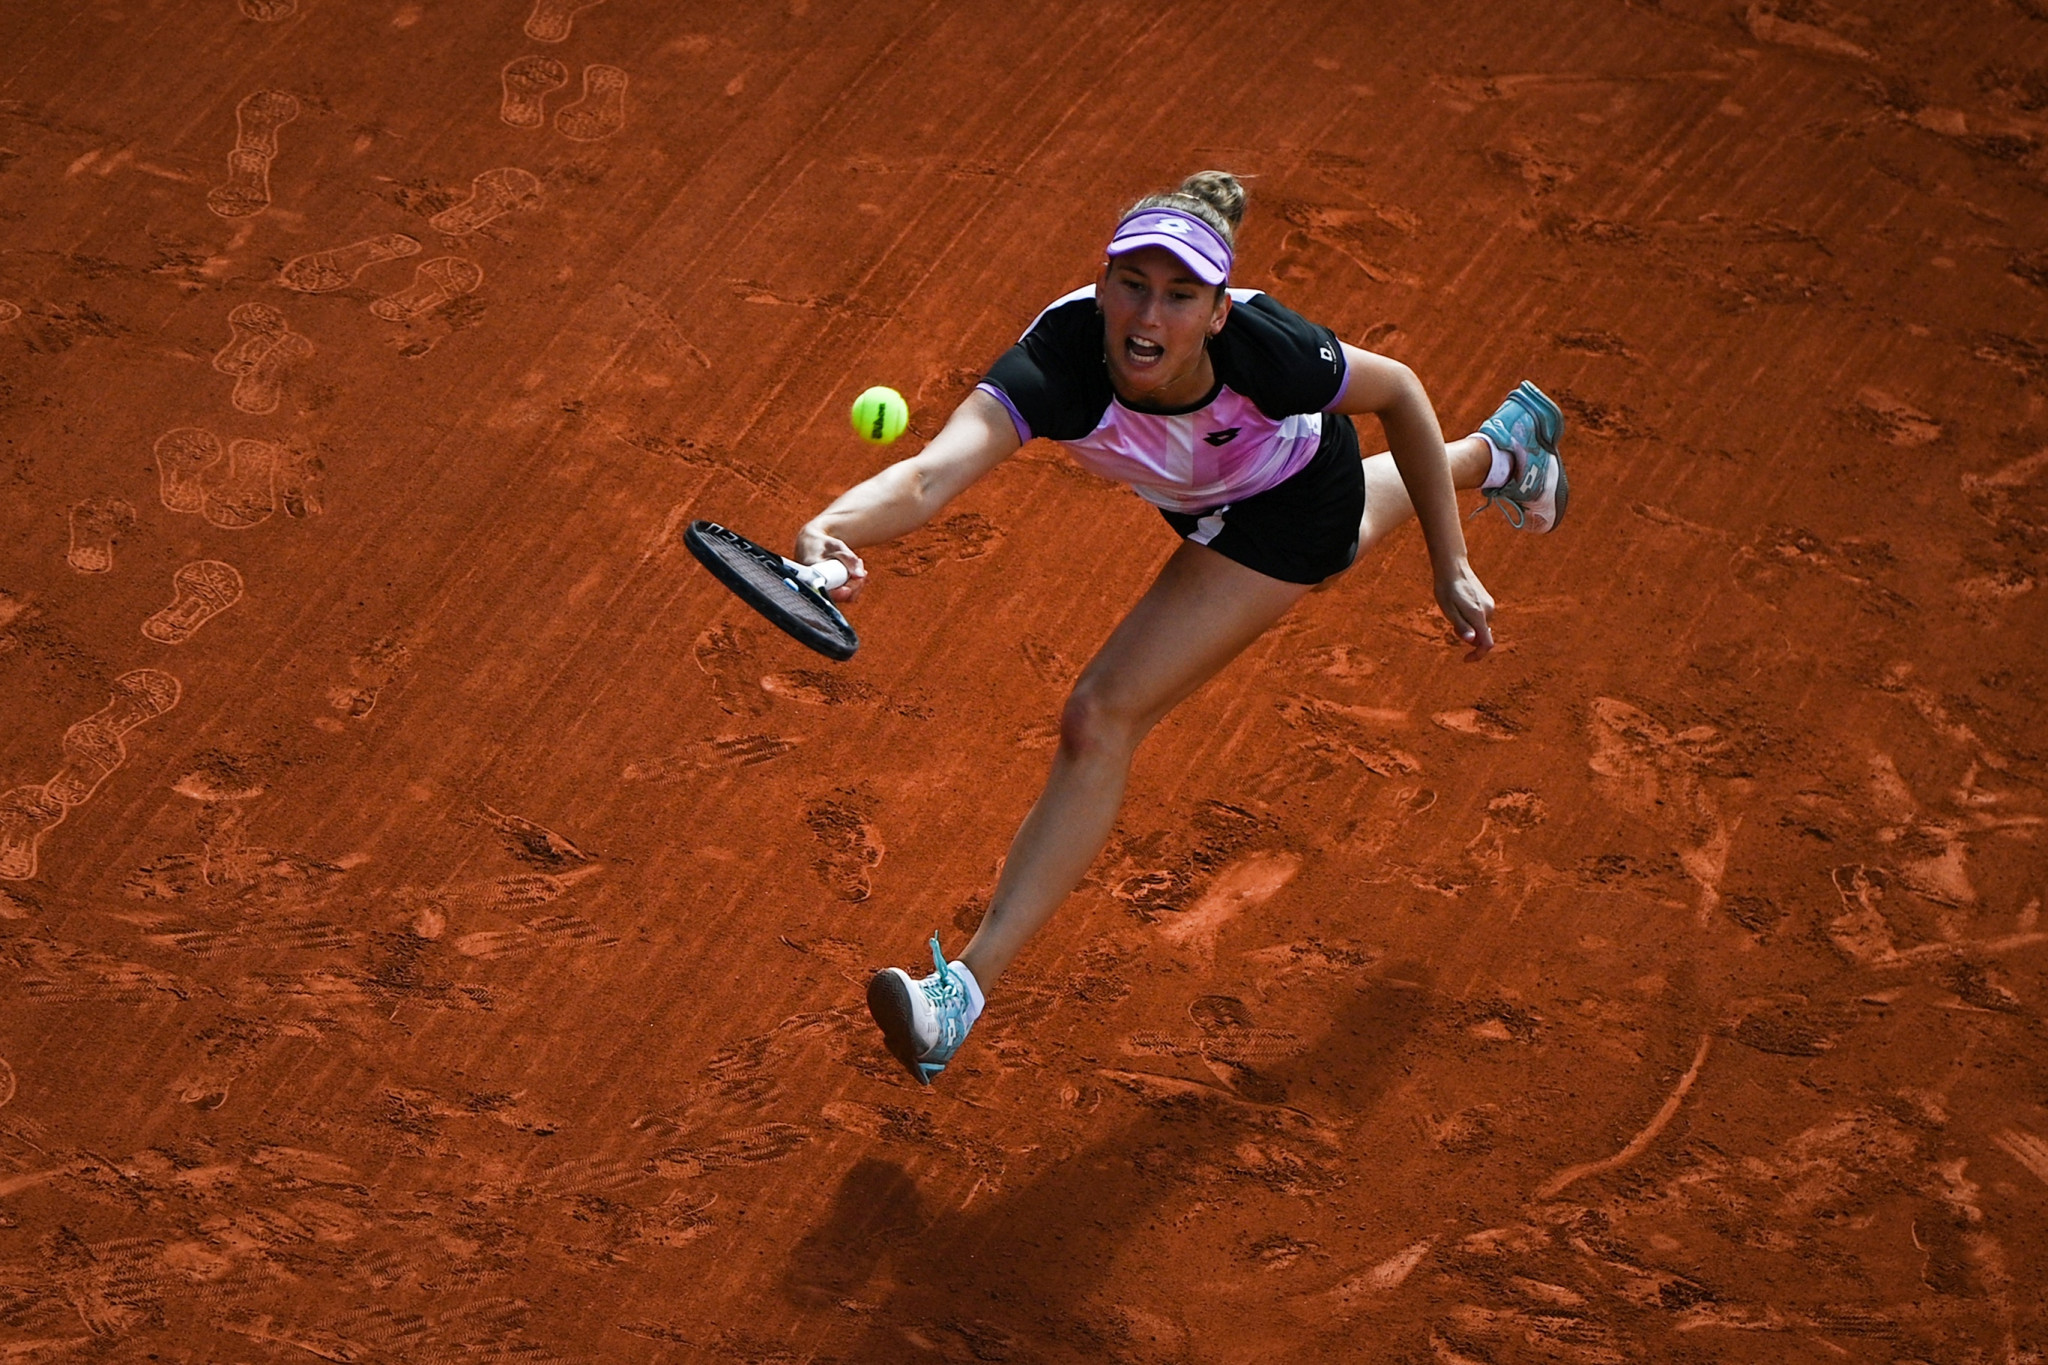 Elise Mertens reaches to retrieve the ball during her defeat to Maria Sakkari ©Getty Images